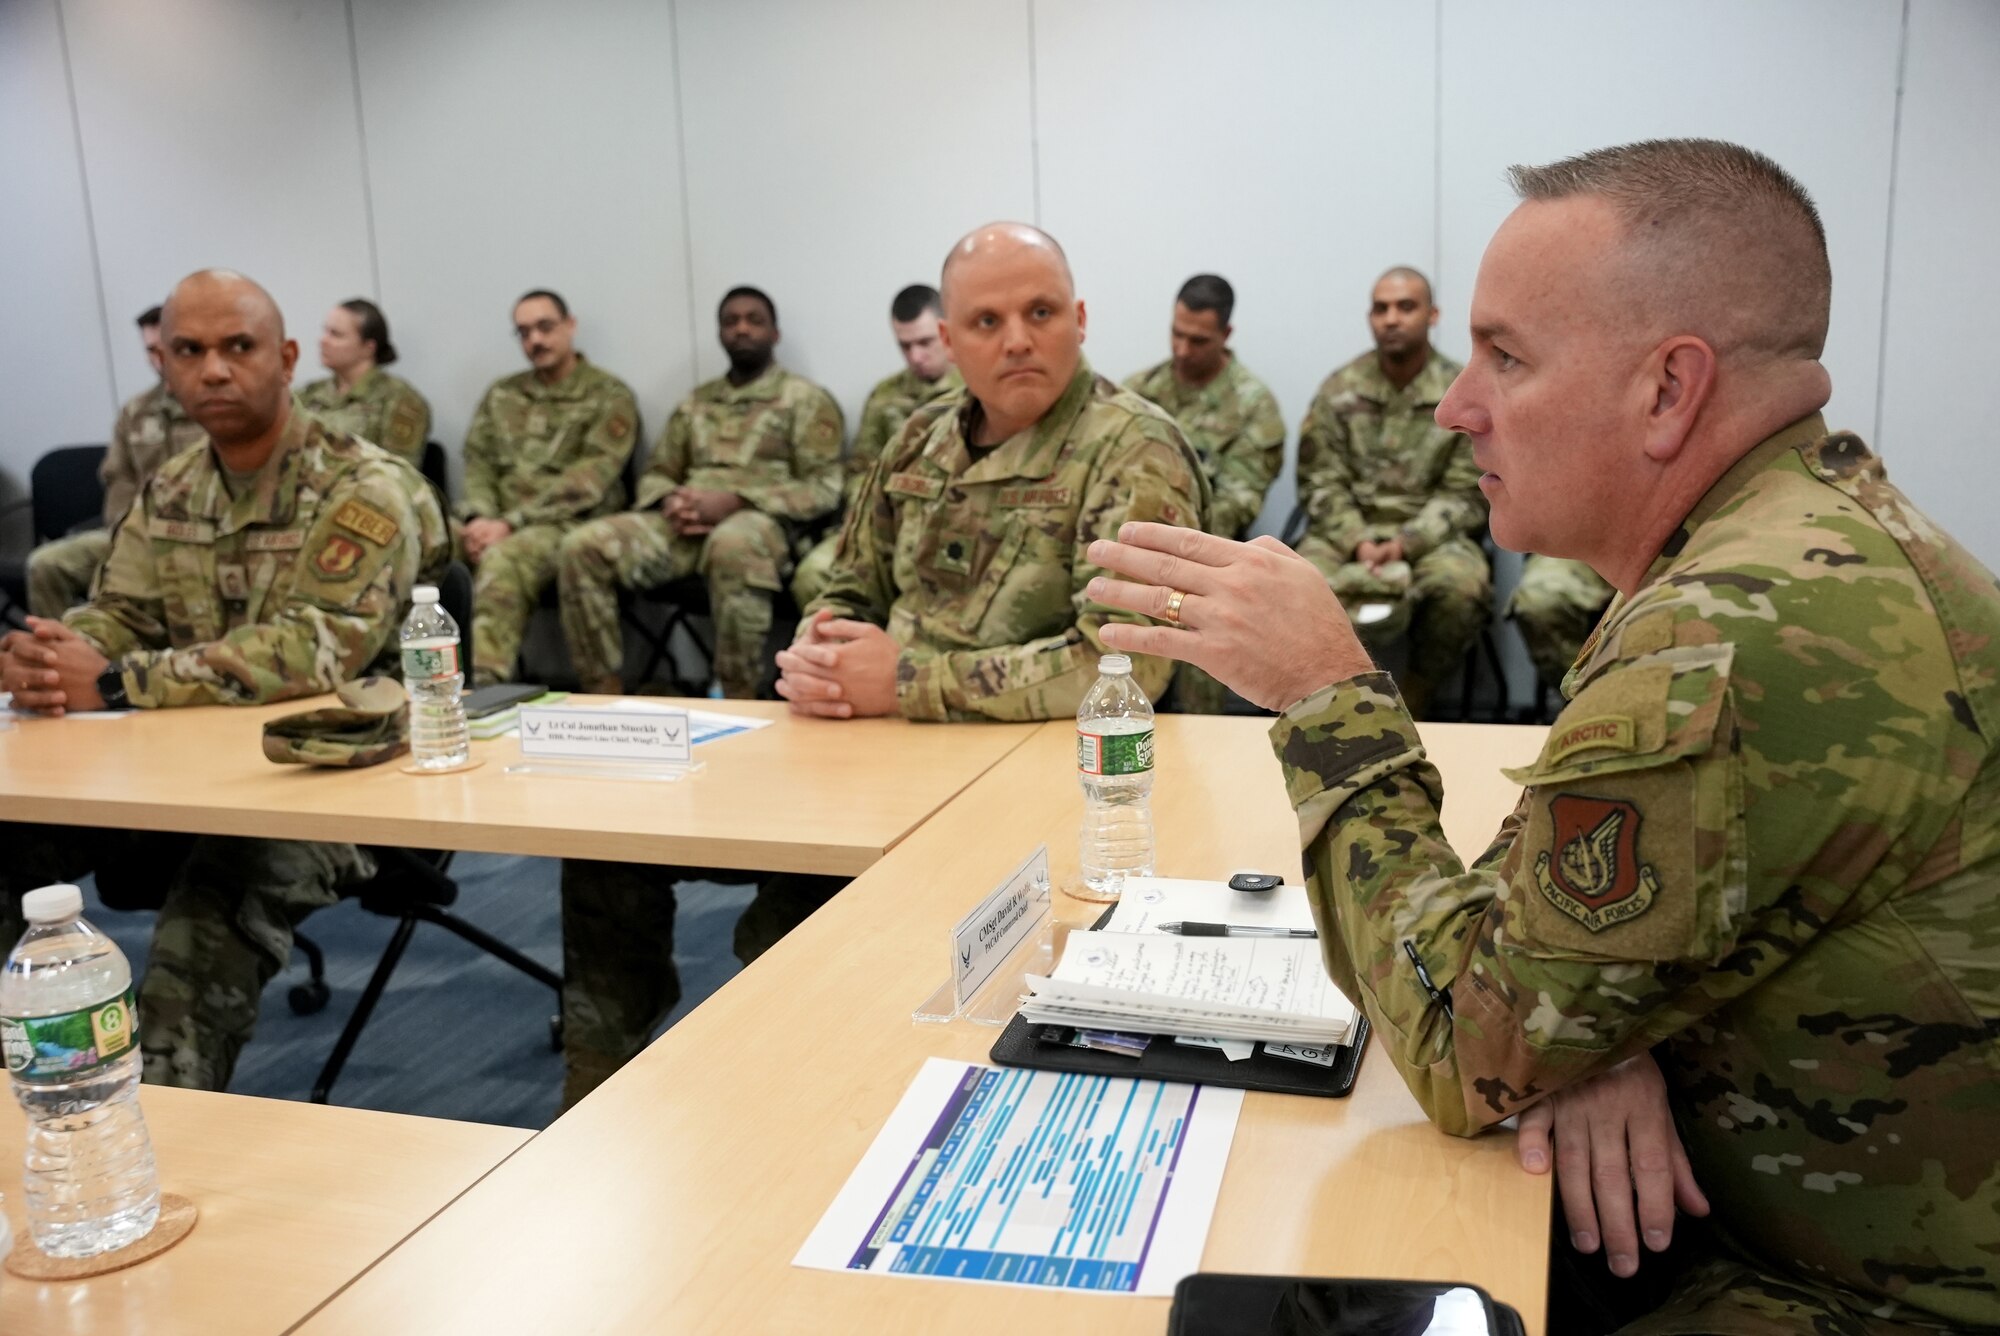 Chief Master Sgt. David R. Wolfe, right, asks questions during a brief at Kessel Run’s office here, March 20, 2023. Wolfe visited Kessel Run to educate Airmen on the current state of the Pacific Region and learn more about Kessel Run’s applications. Wolfe is the command chief master sergeant for Pacific Air Forces, Joint Base Pearl Harbor-Hickam, Hawaii. (U.S. Air Force photo by Richard Blumenstein)